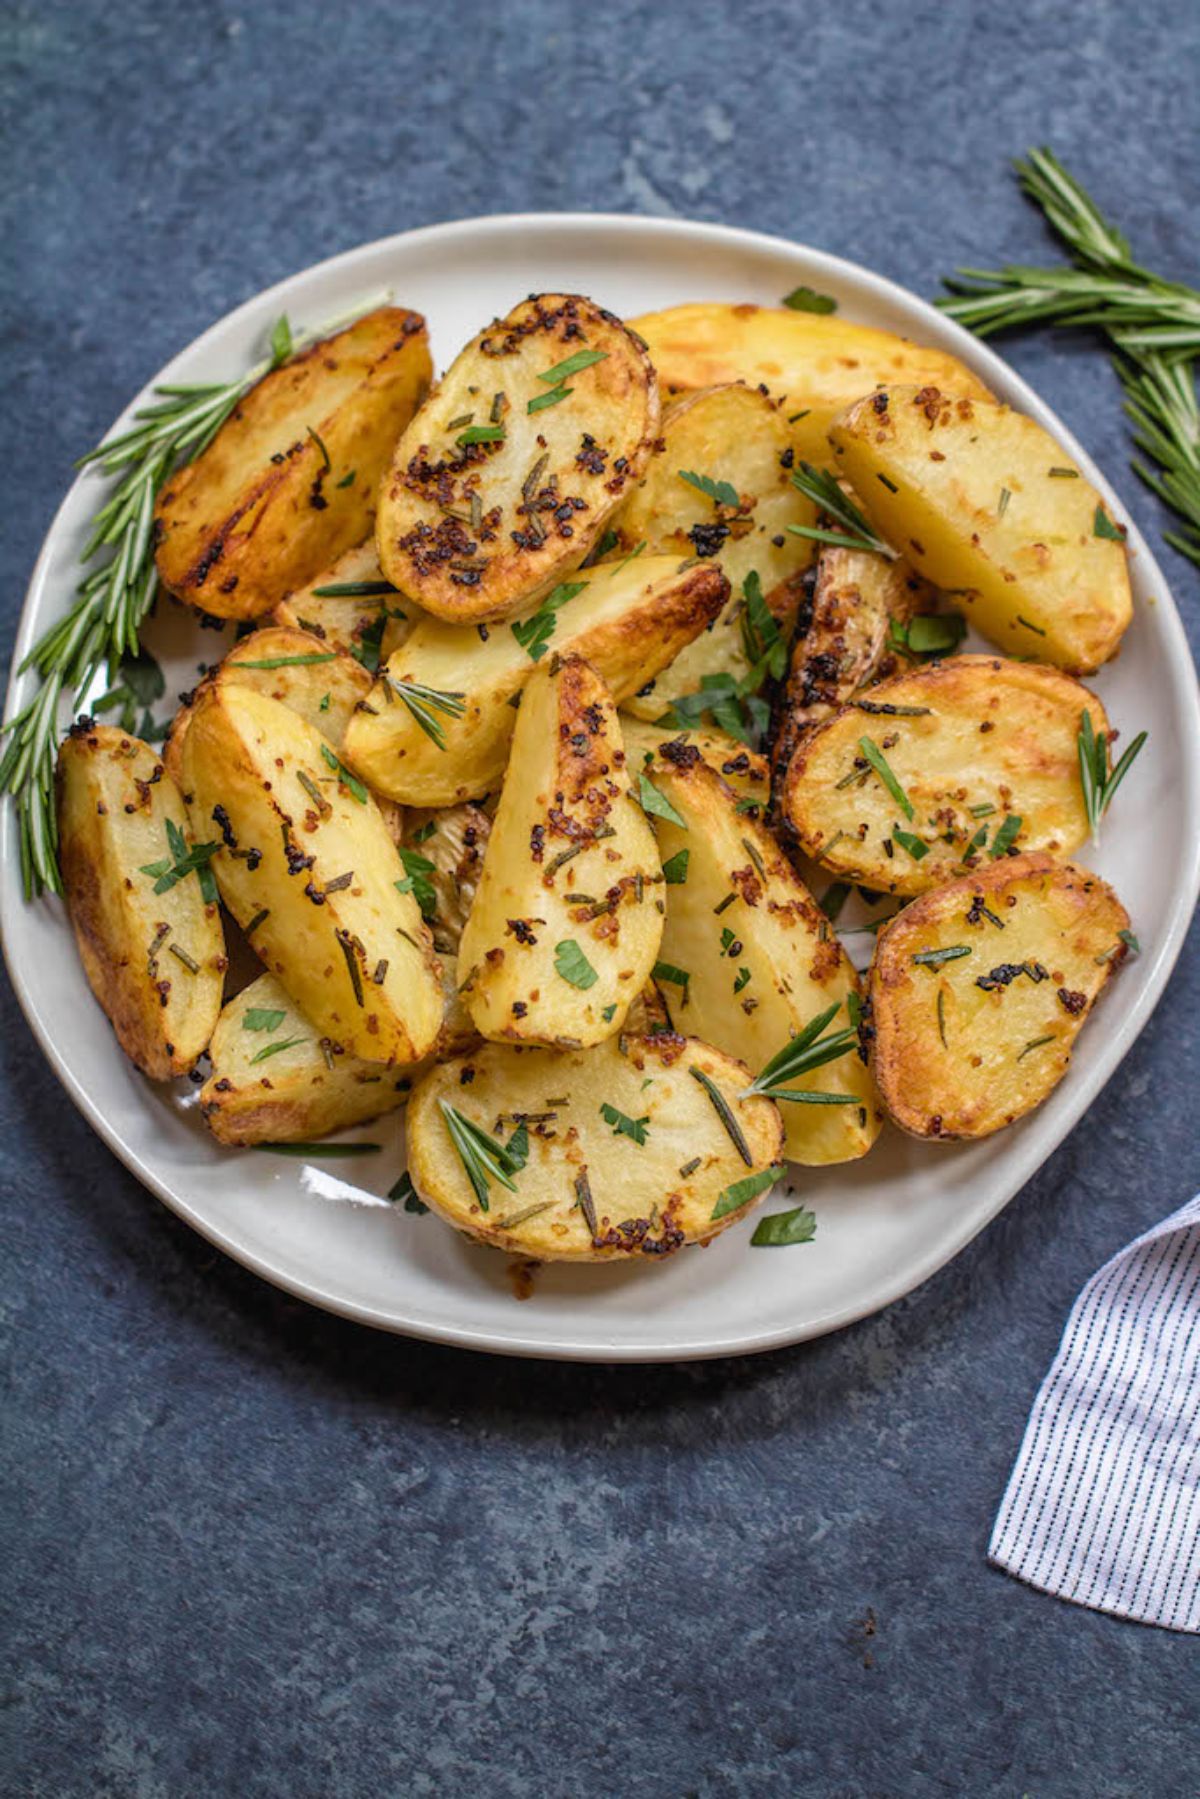 A whote plate of roasted potatoes scattered with rosemary sprigs